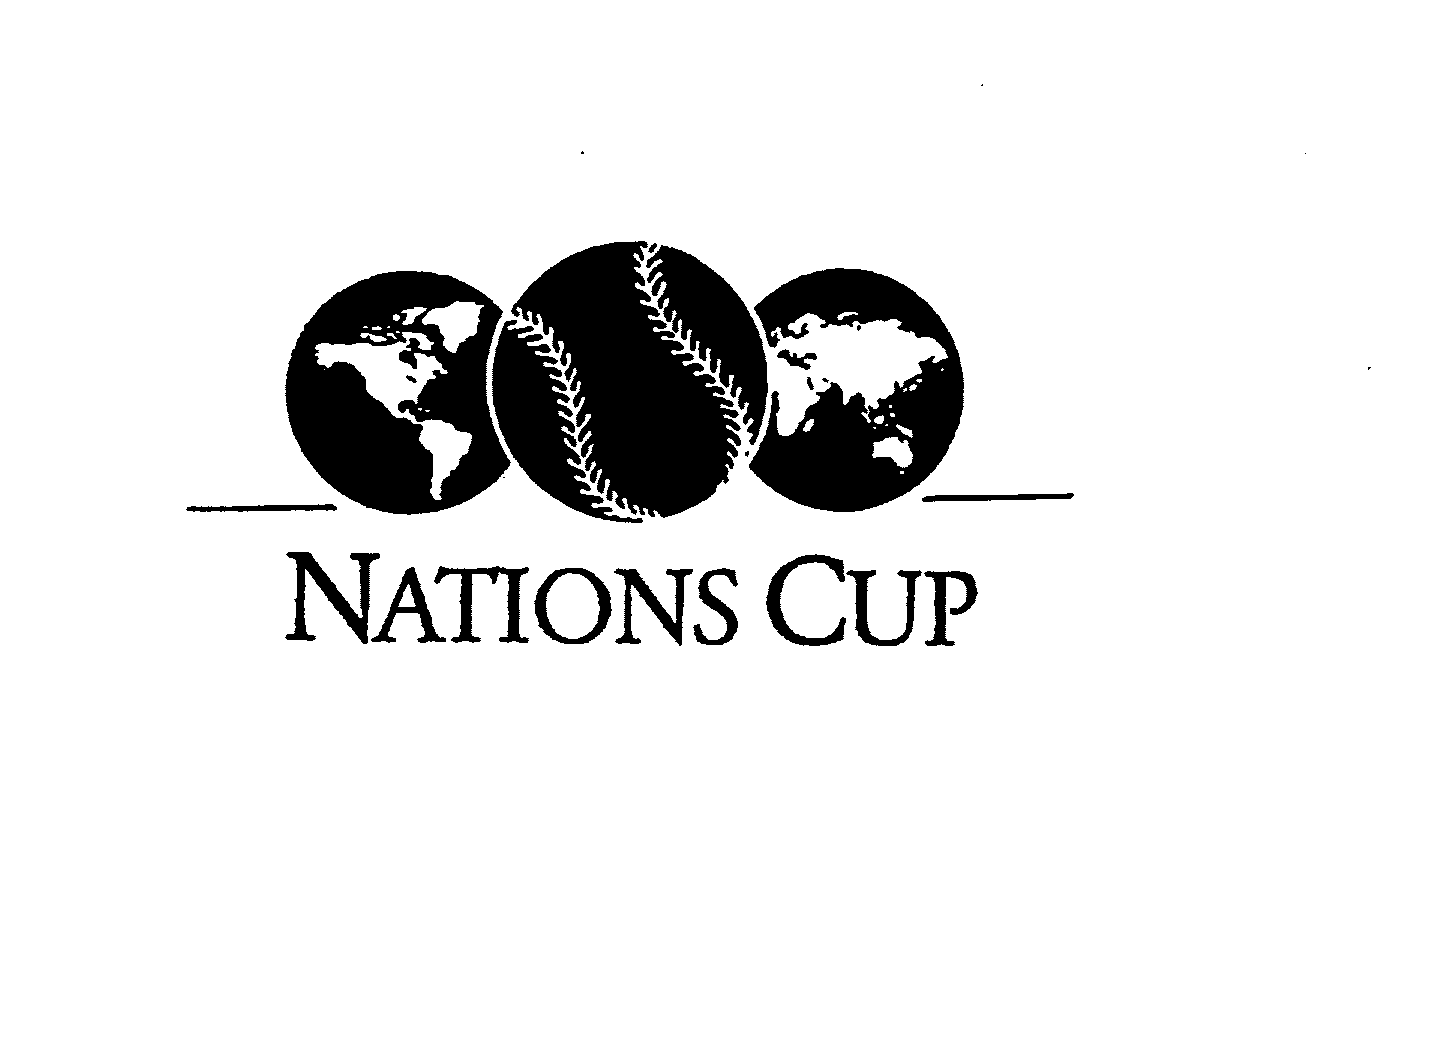  NATIONS CUP